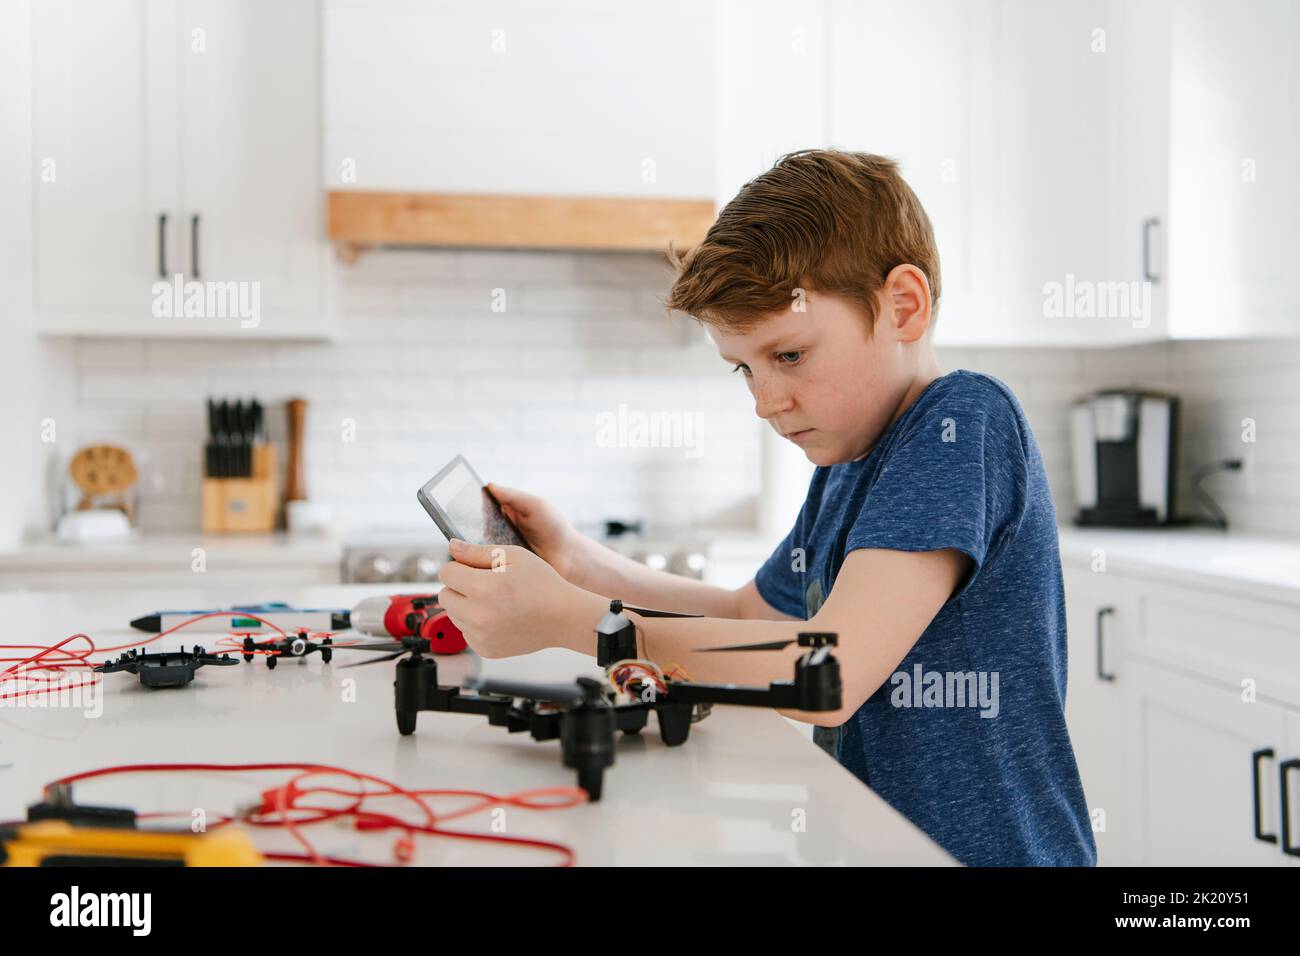 Boy with digital tablet learning to assemble drone at kitchen counter Stock Photo